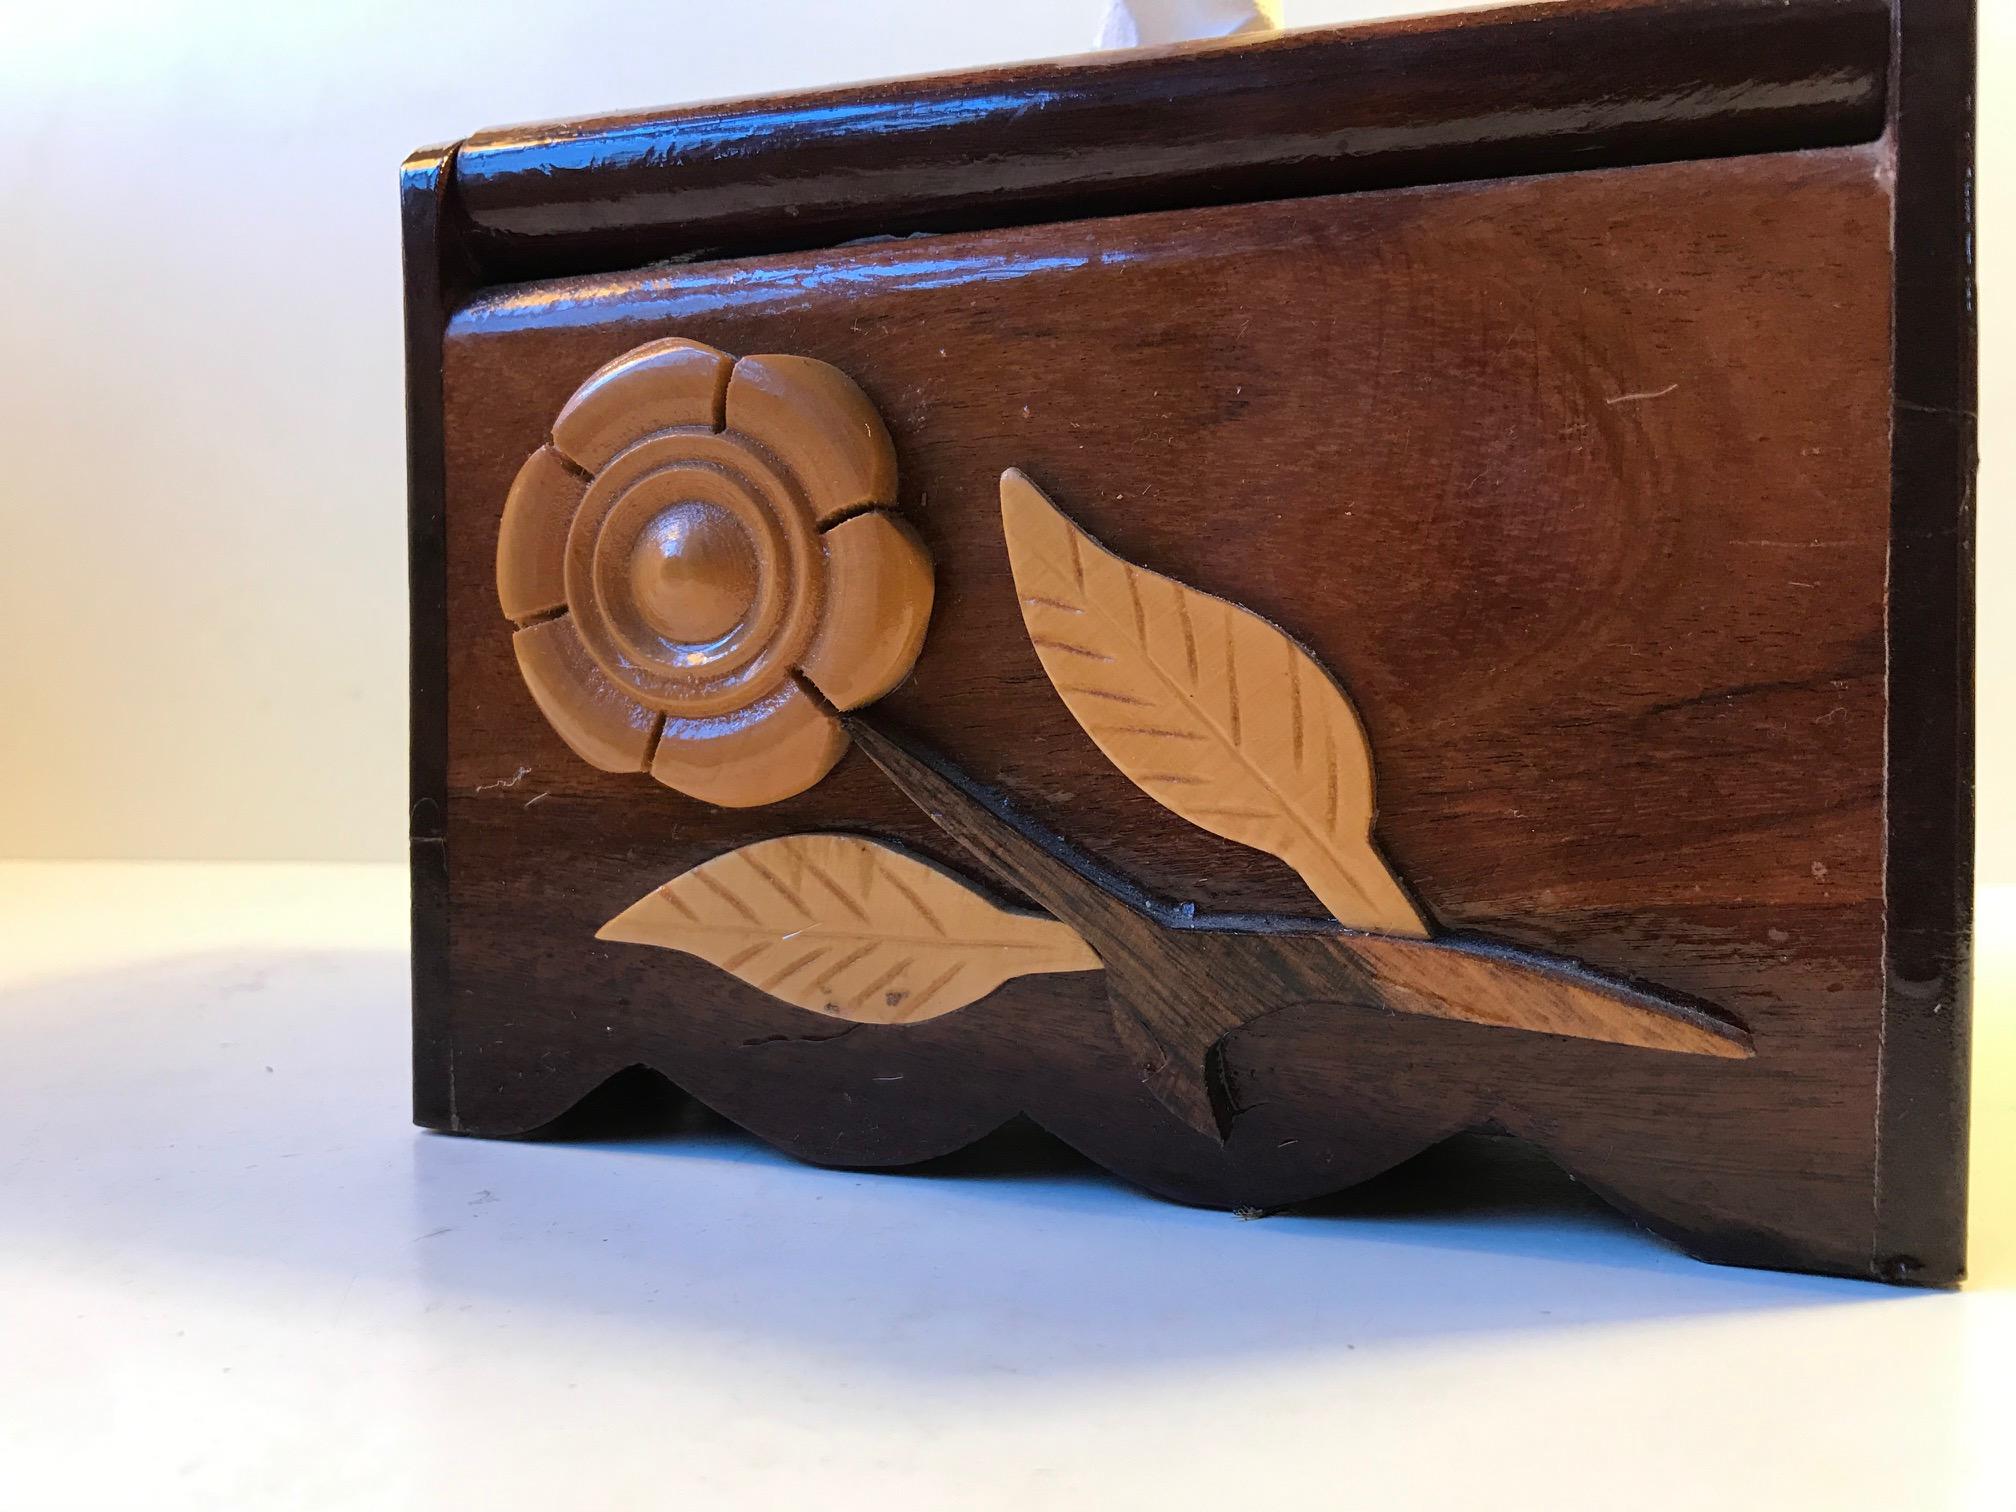 Ornate and decorative paper towel box in handcrafted and lacquered wood: teak, oak, mahogany, cherry, walnut etc. It is very practical and offers a cheap refill since it runs on toilet paper.